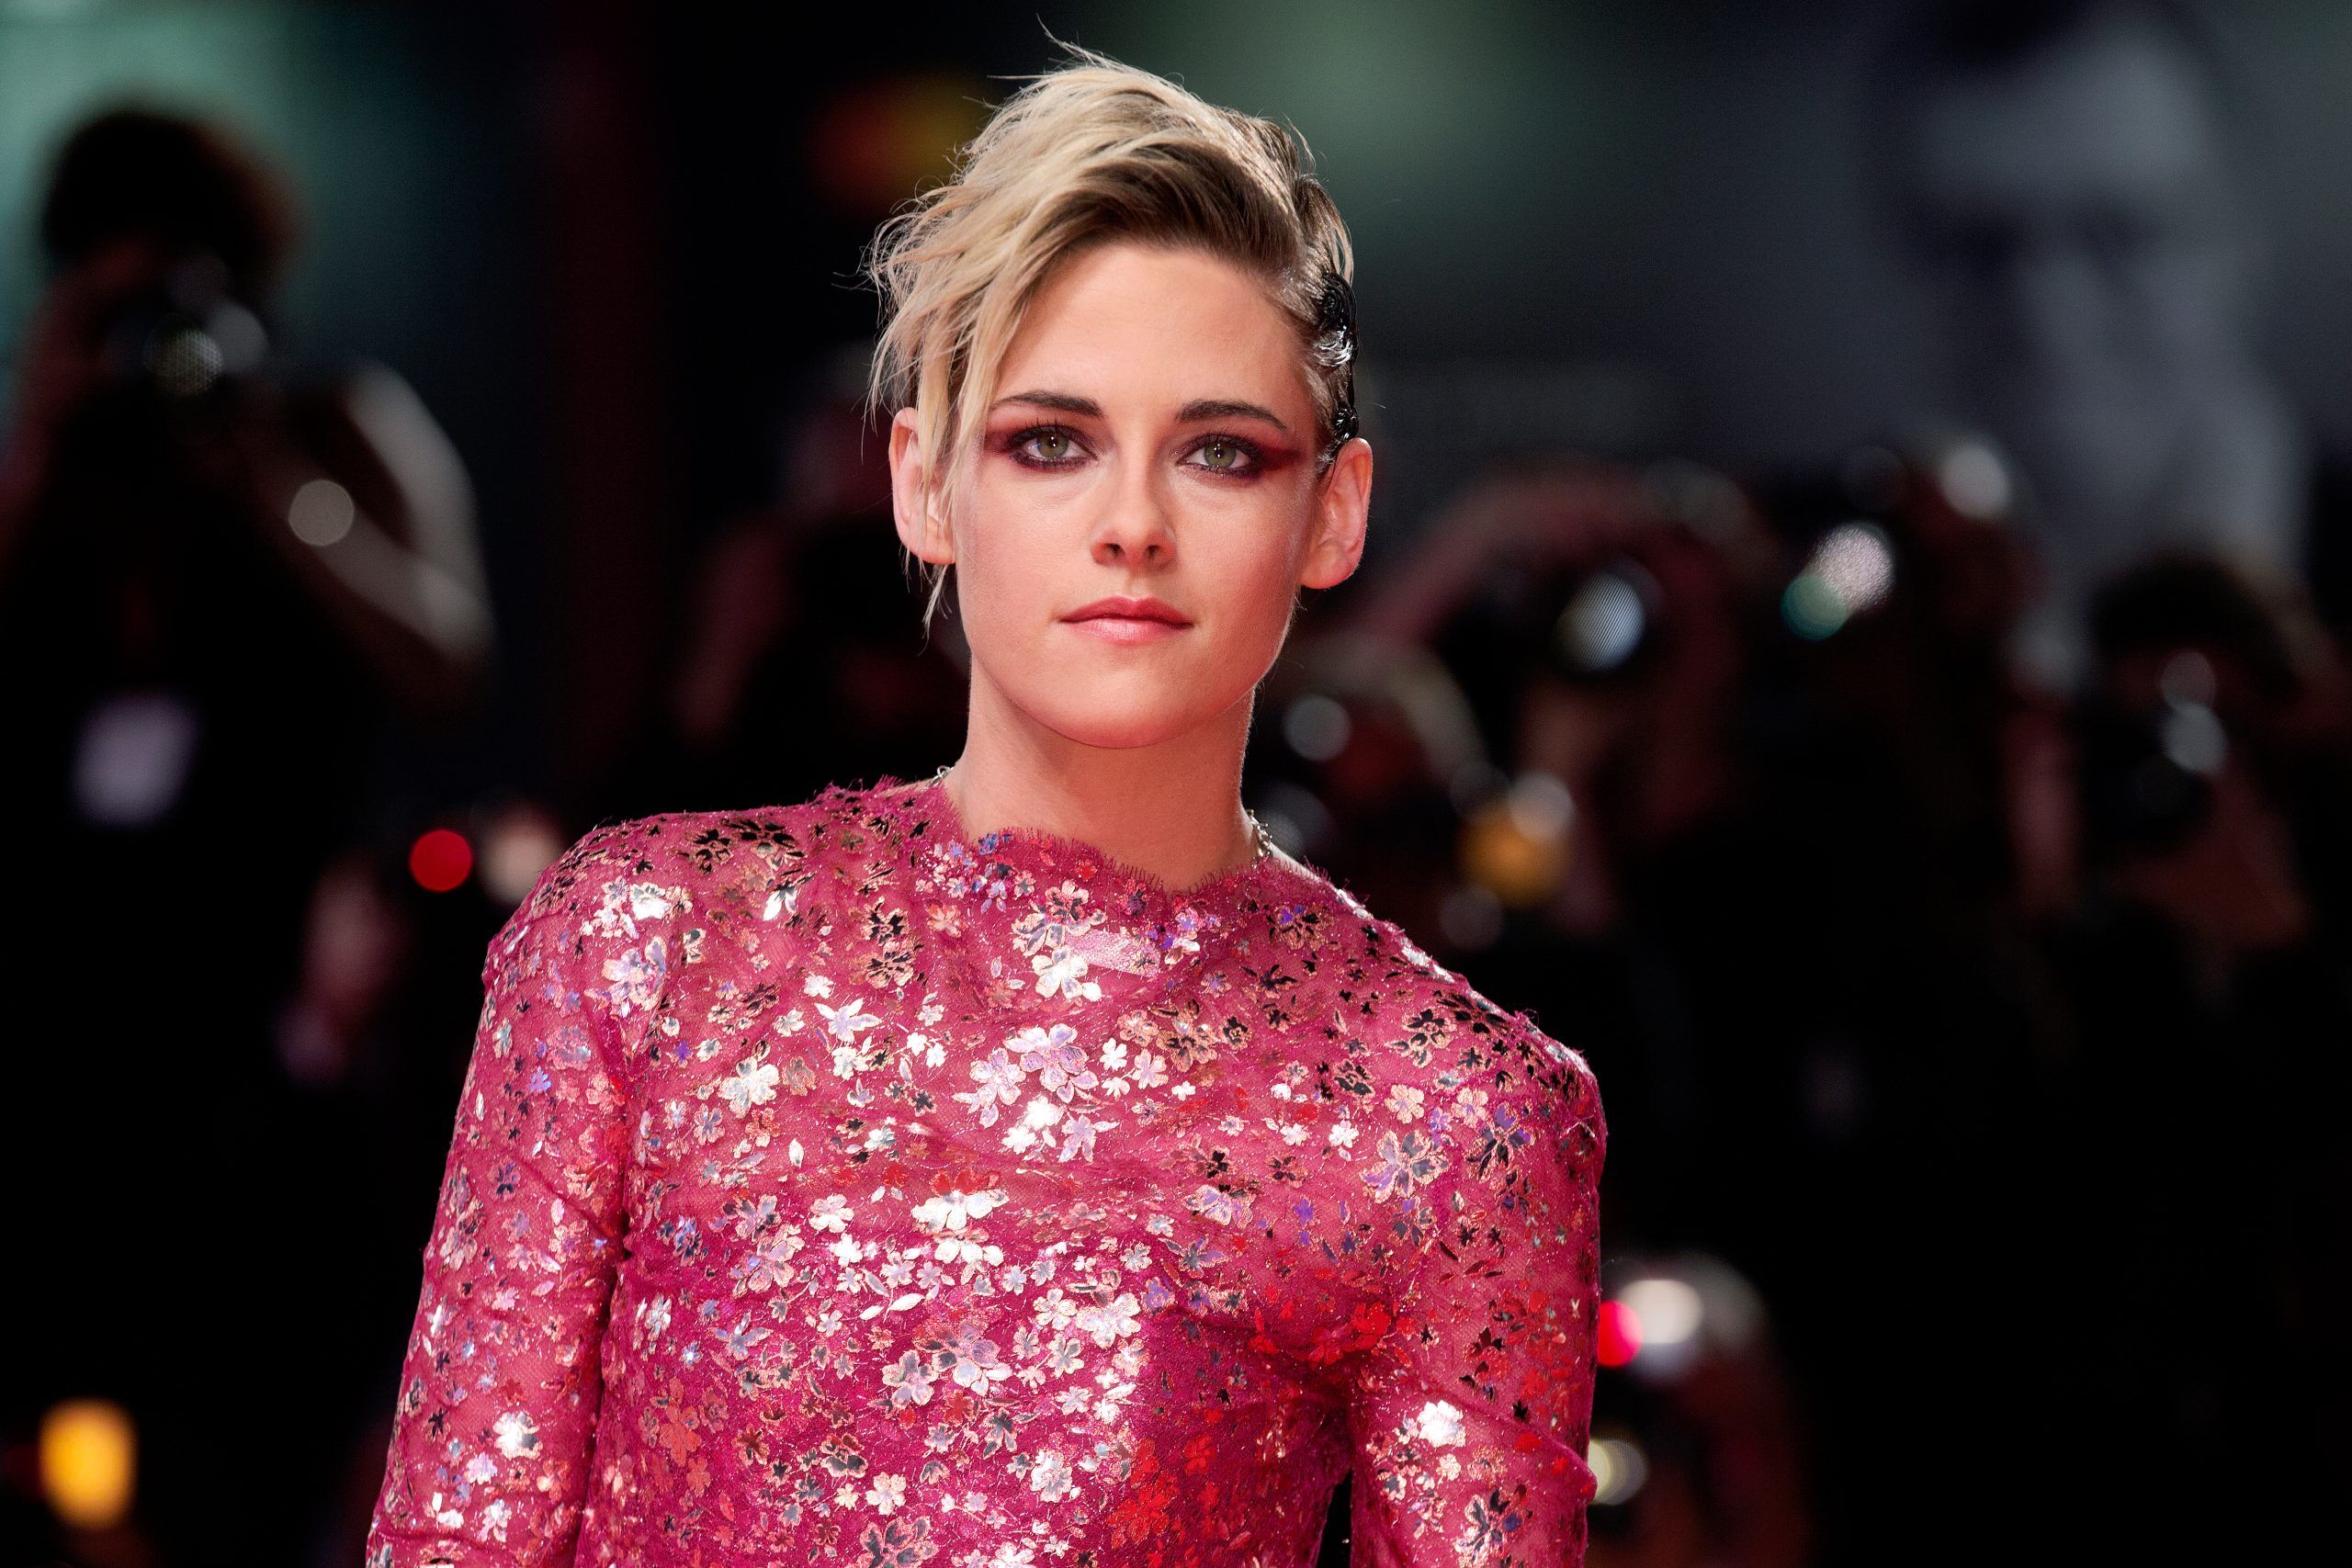 Kristen Stewart attends the premiere of the movie "Seberg" during the 76th Venice Film Festival on August 30, 2019 in Venice, Italy.